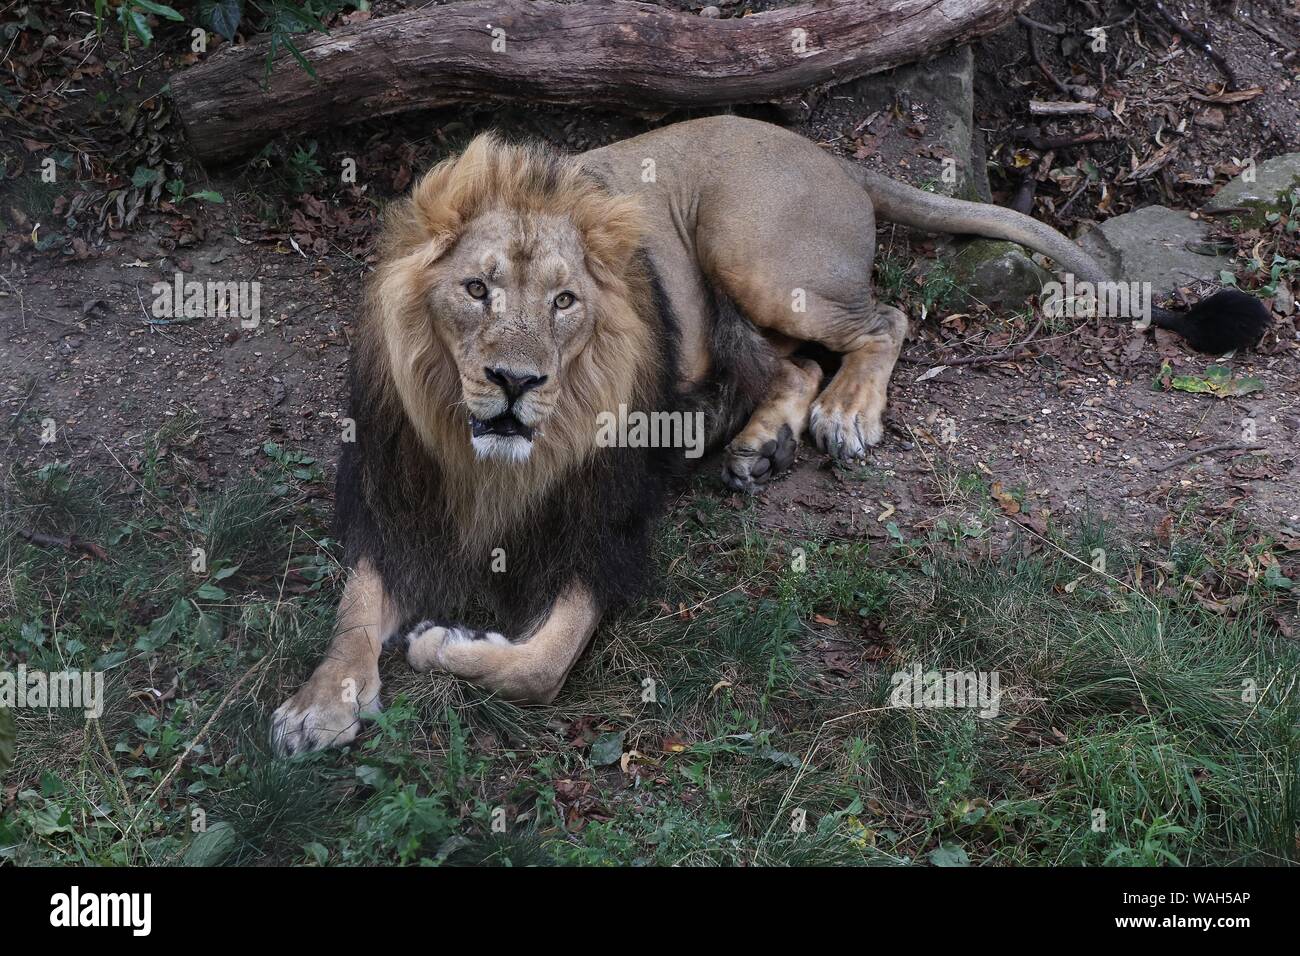 ZSL London Zoo's big cats Asiatic lions given giant seesaw to celebrate World Lion Day 7 August 2019  London UK Stock Photo